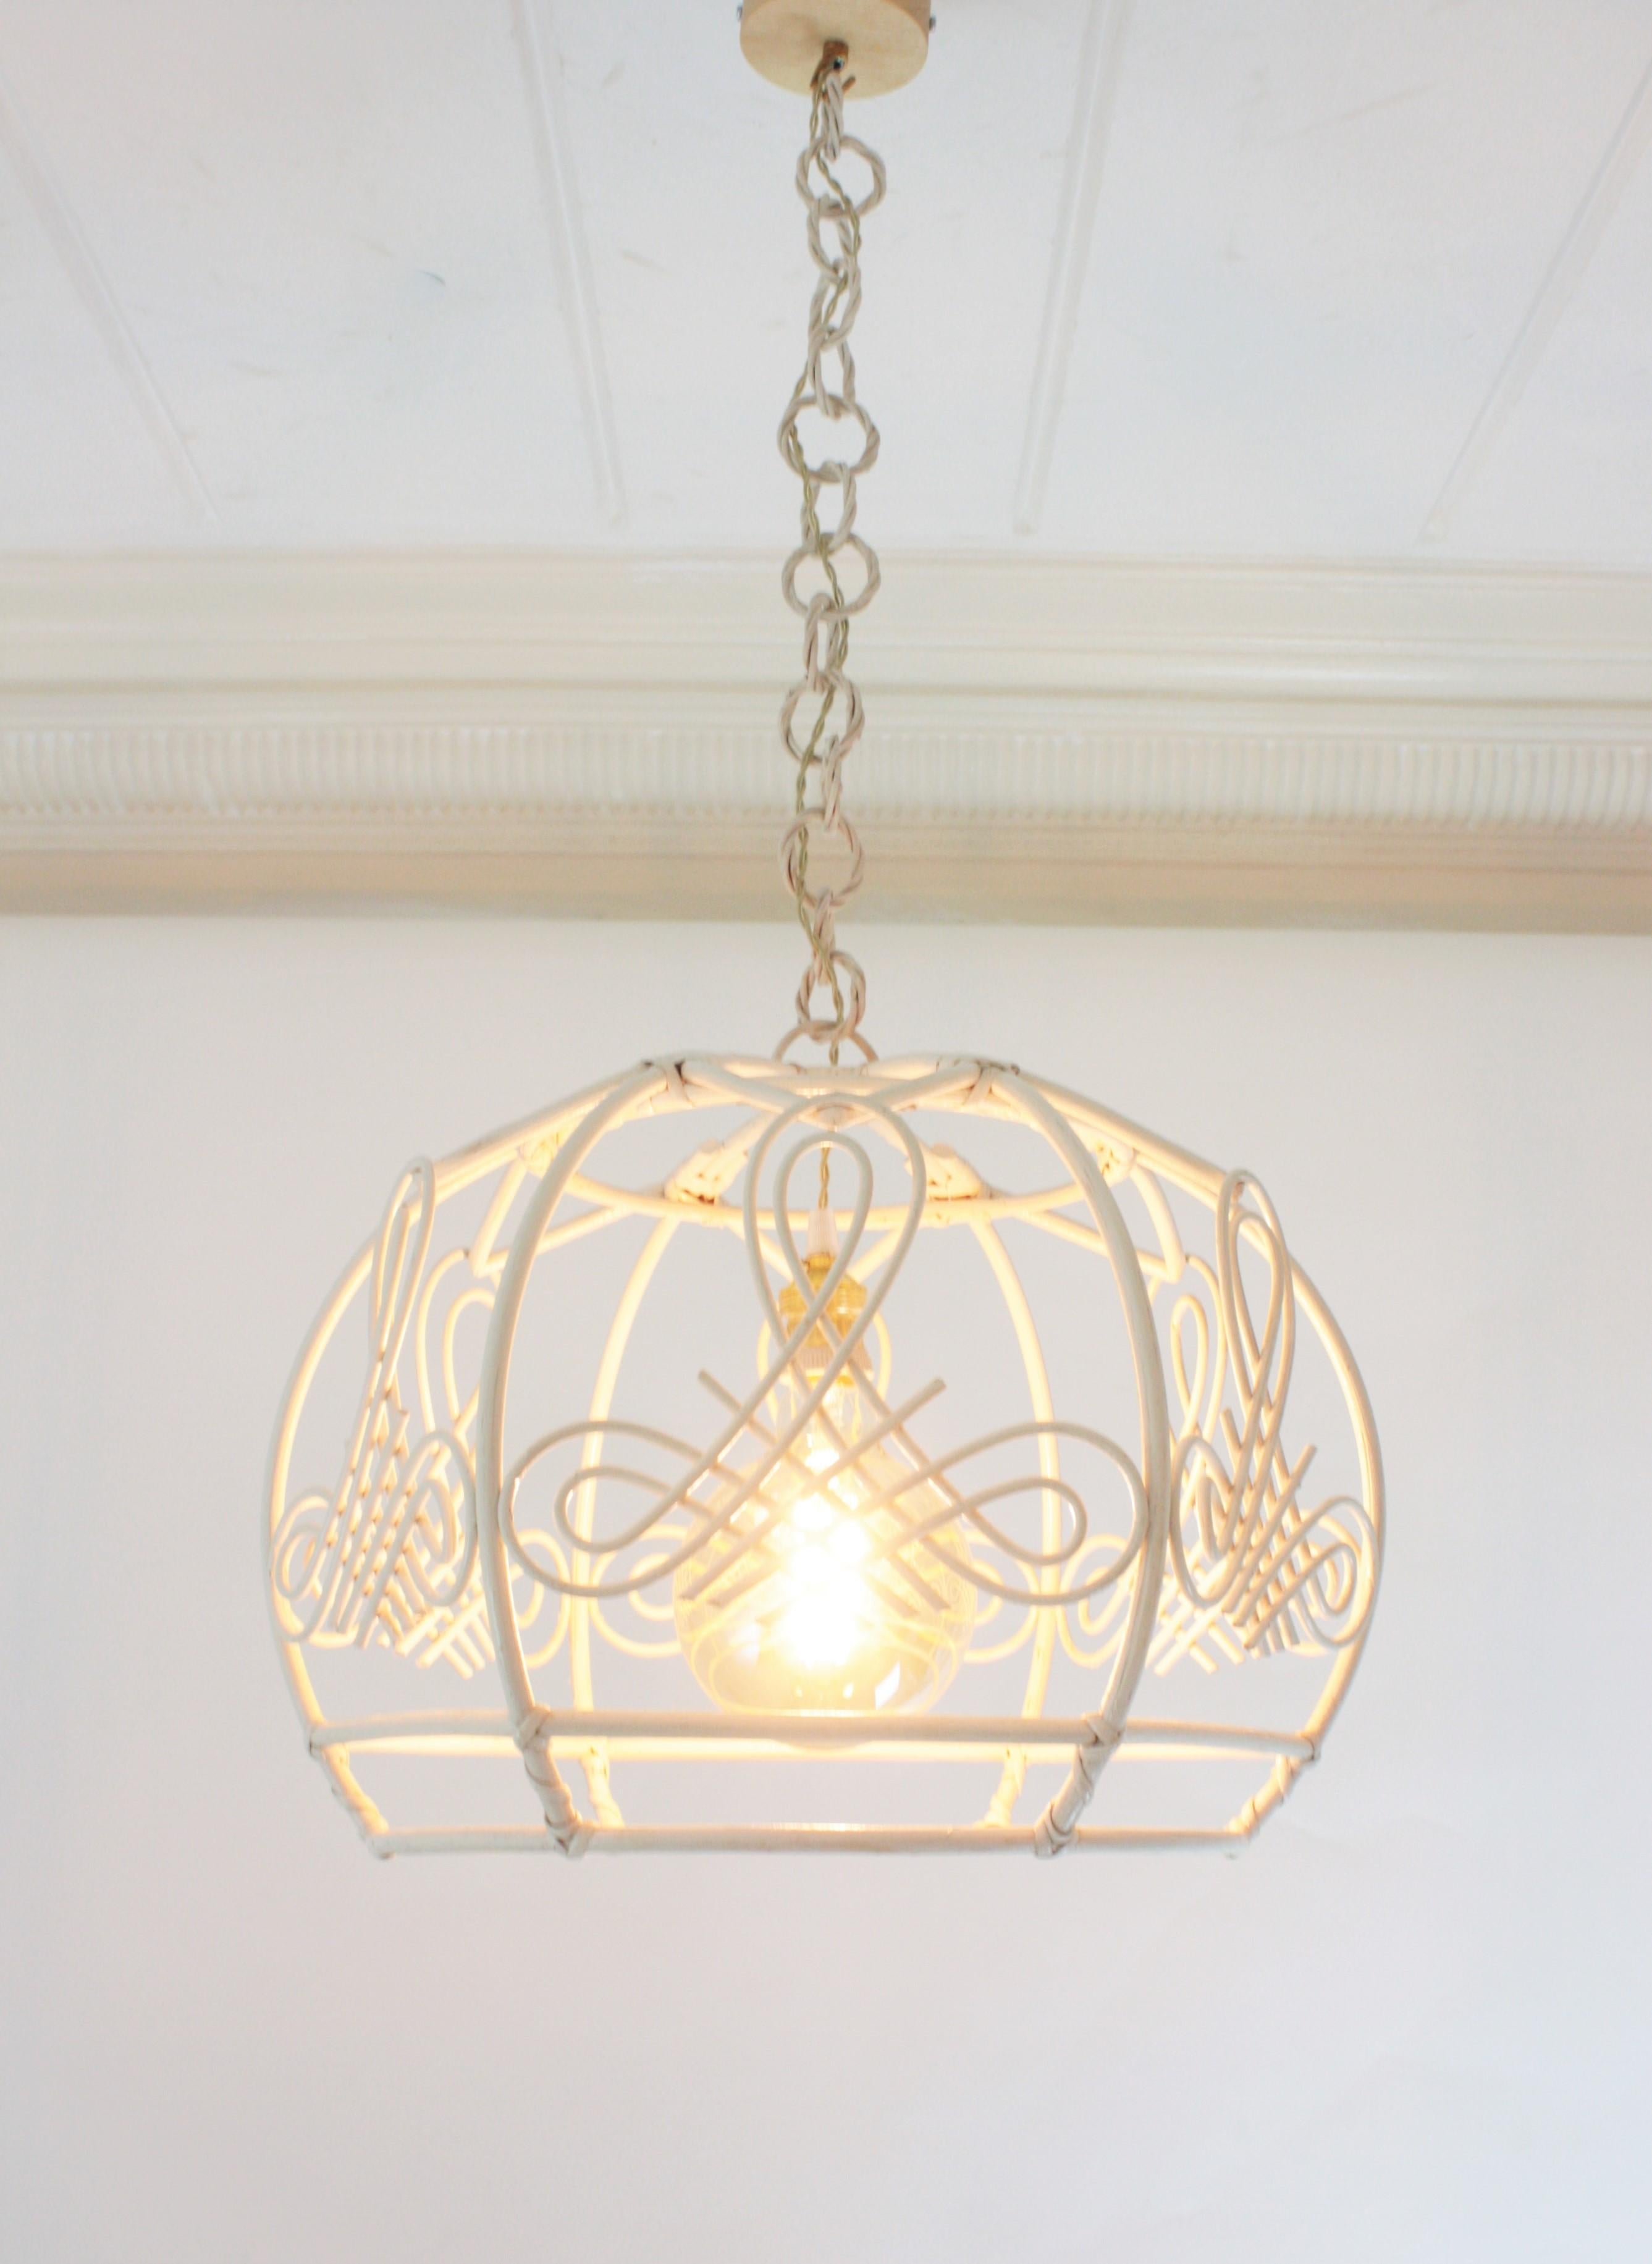 French Rattan Bell Pendant Lamp / Lantern in White Patina, 1960s For Sale 9